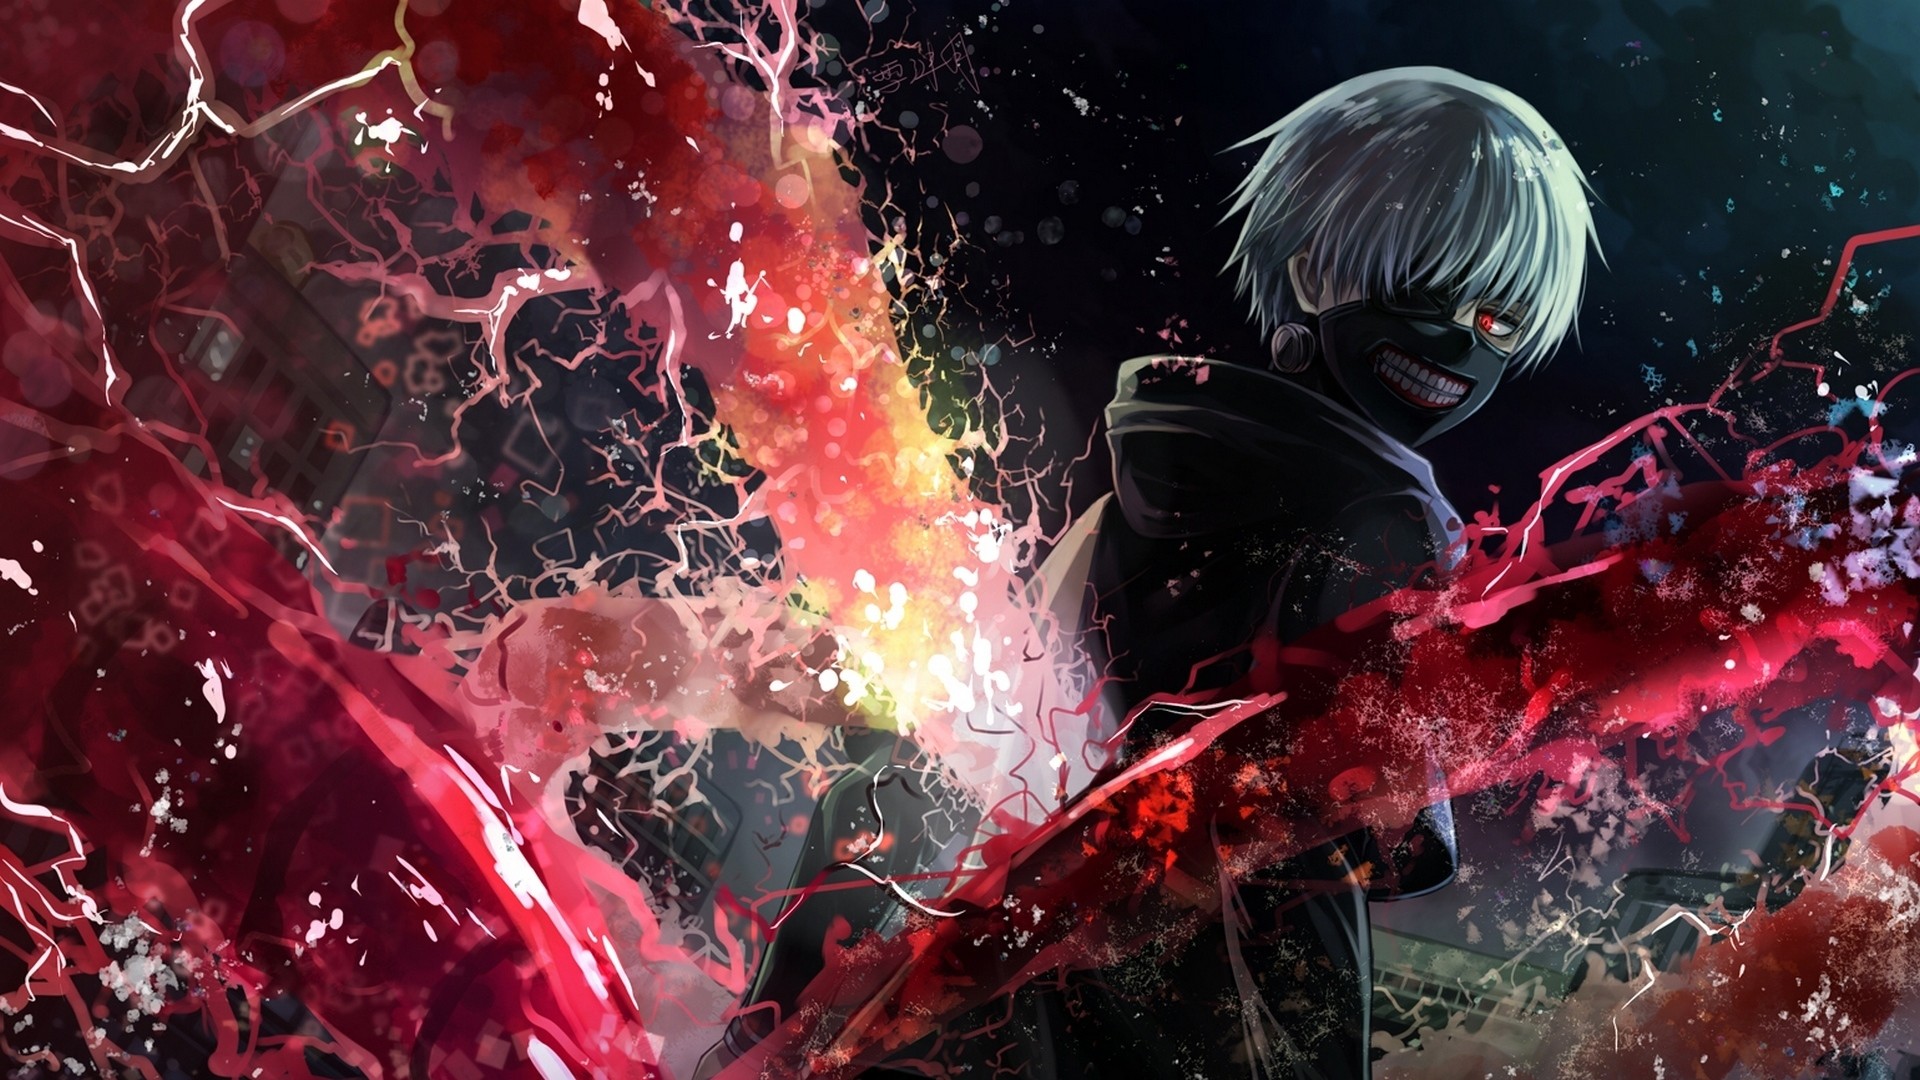 1920x1080 Full HD 1080p Anime Wallpapers, Desktop Backgrounds HD, Pictures ... src